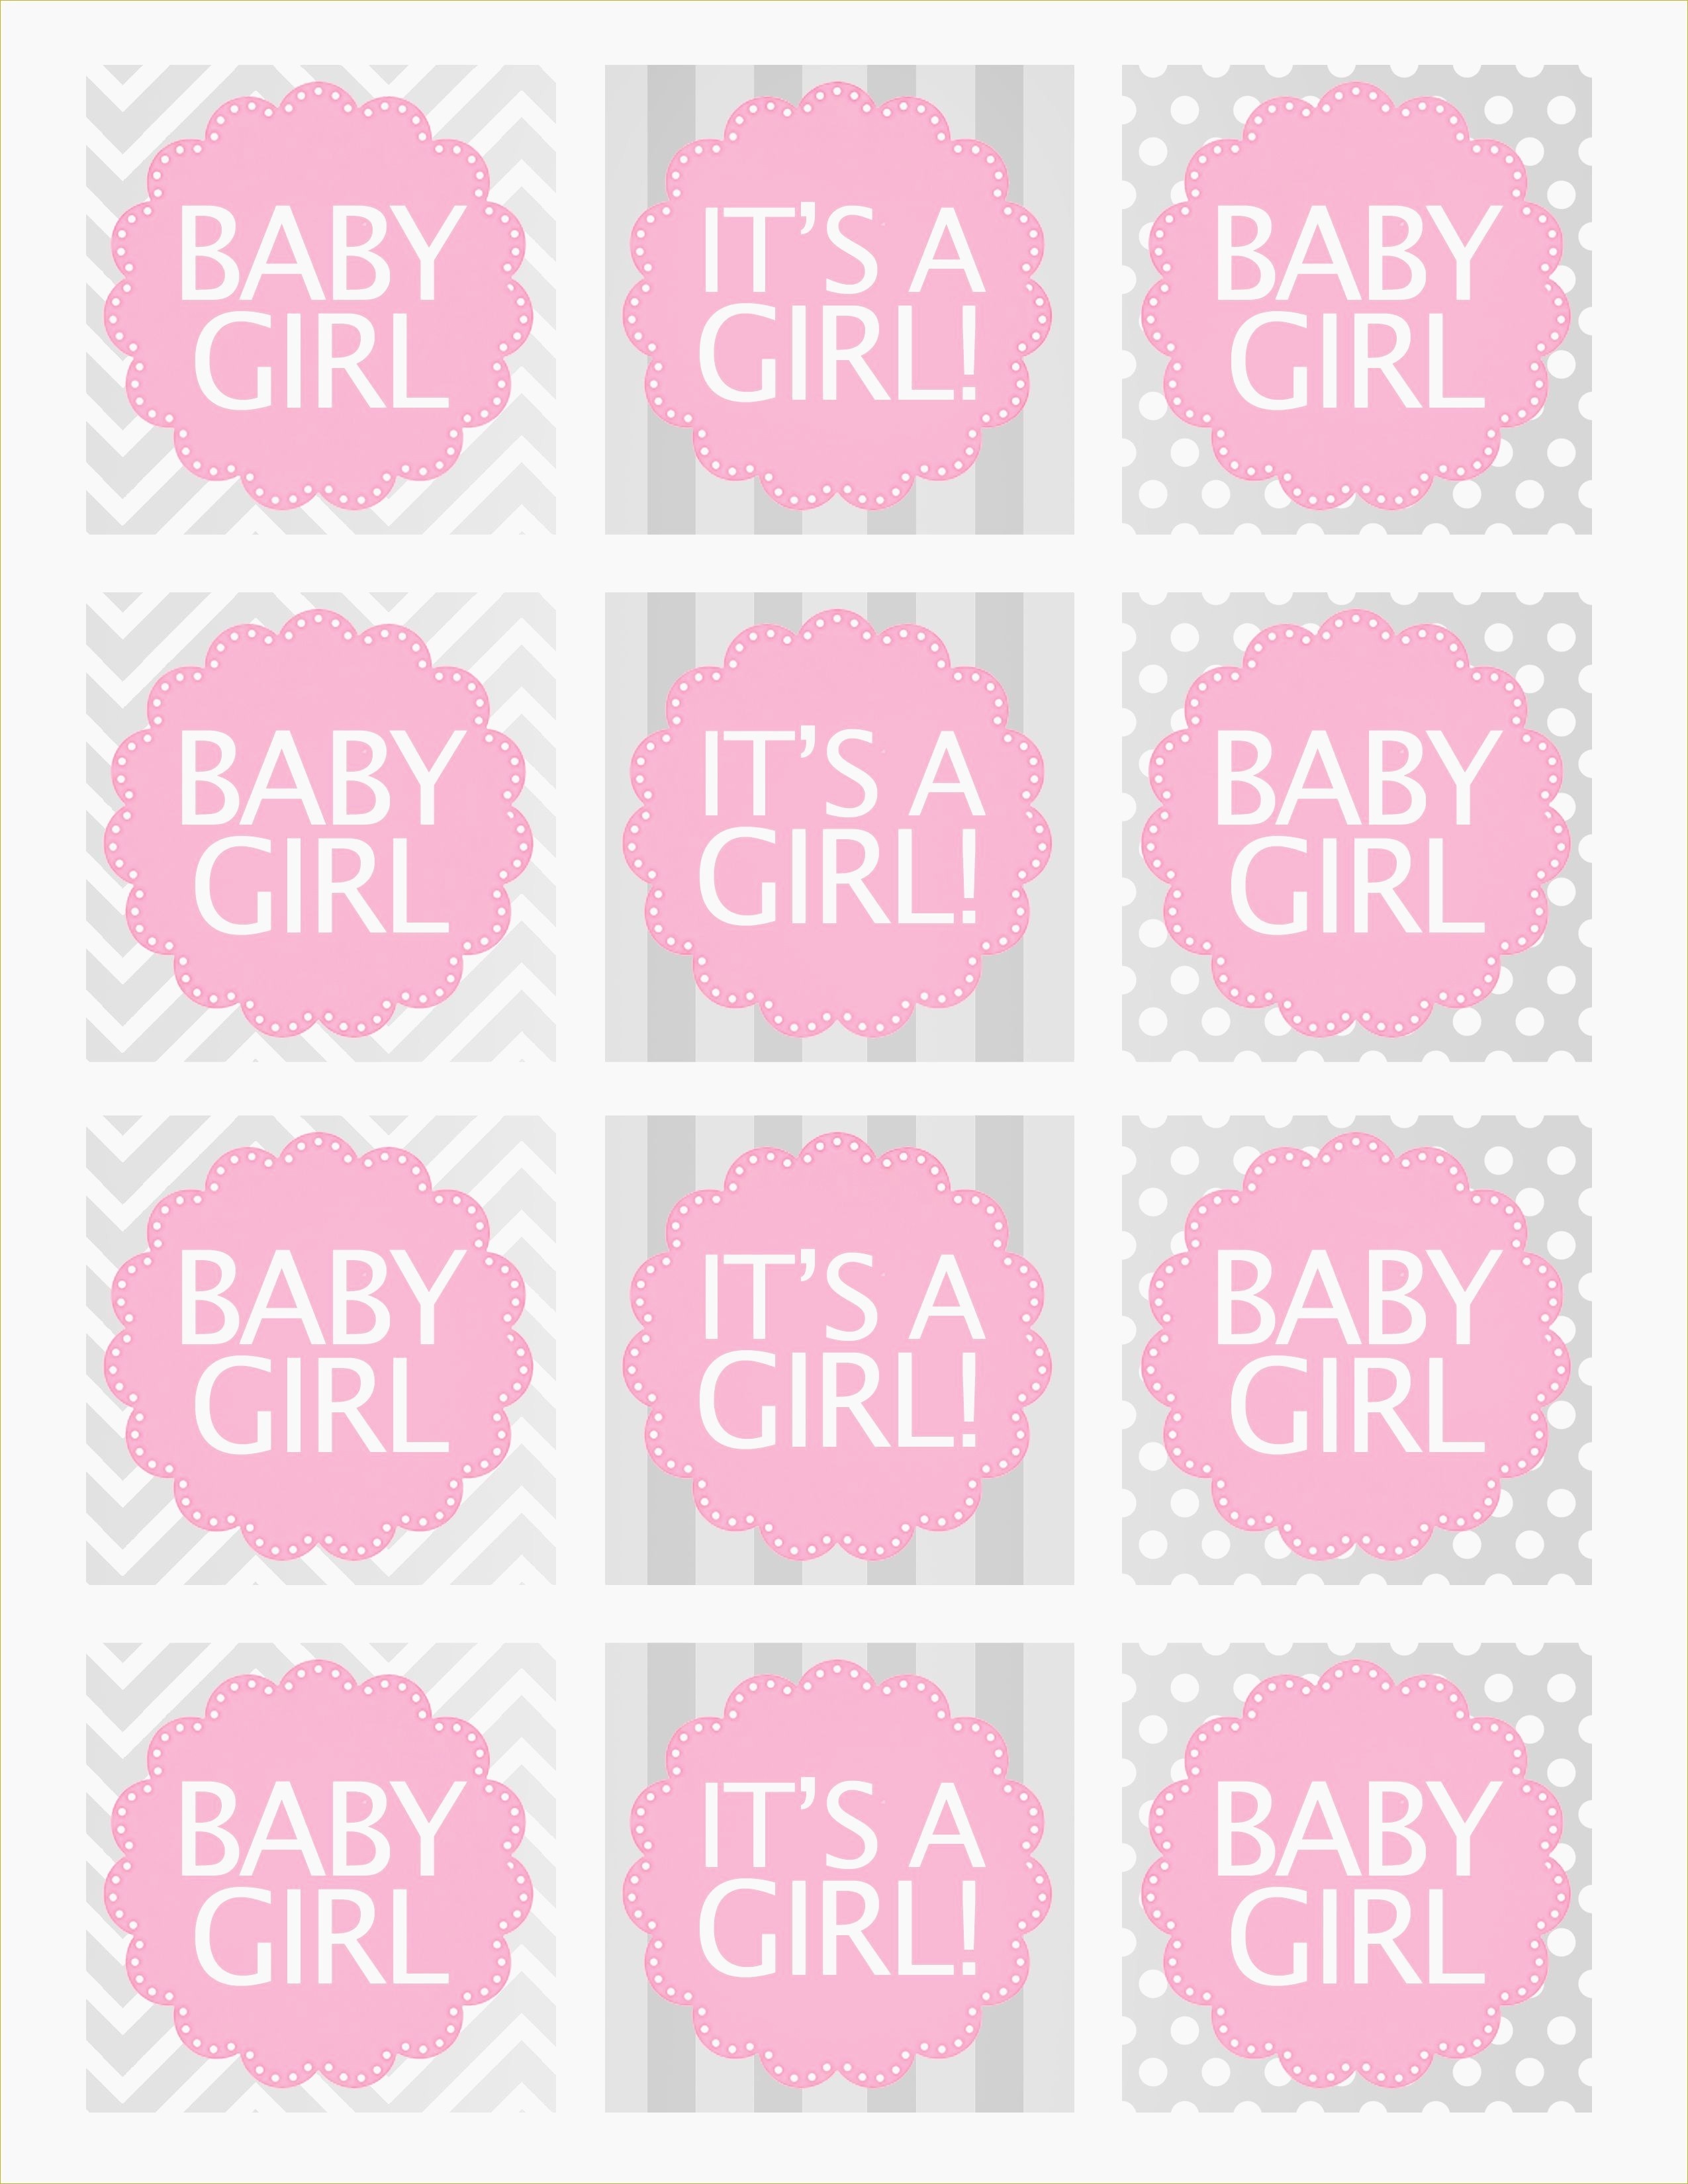 Inspirational Elephant Baby Shower Templates | Www.pantry-Magic - Free Printable Baby Shower Favor Tags Template